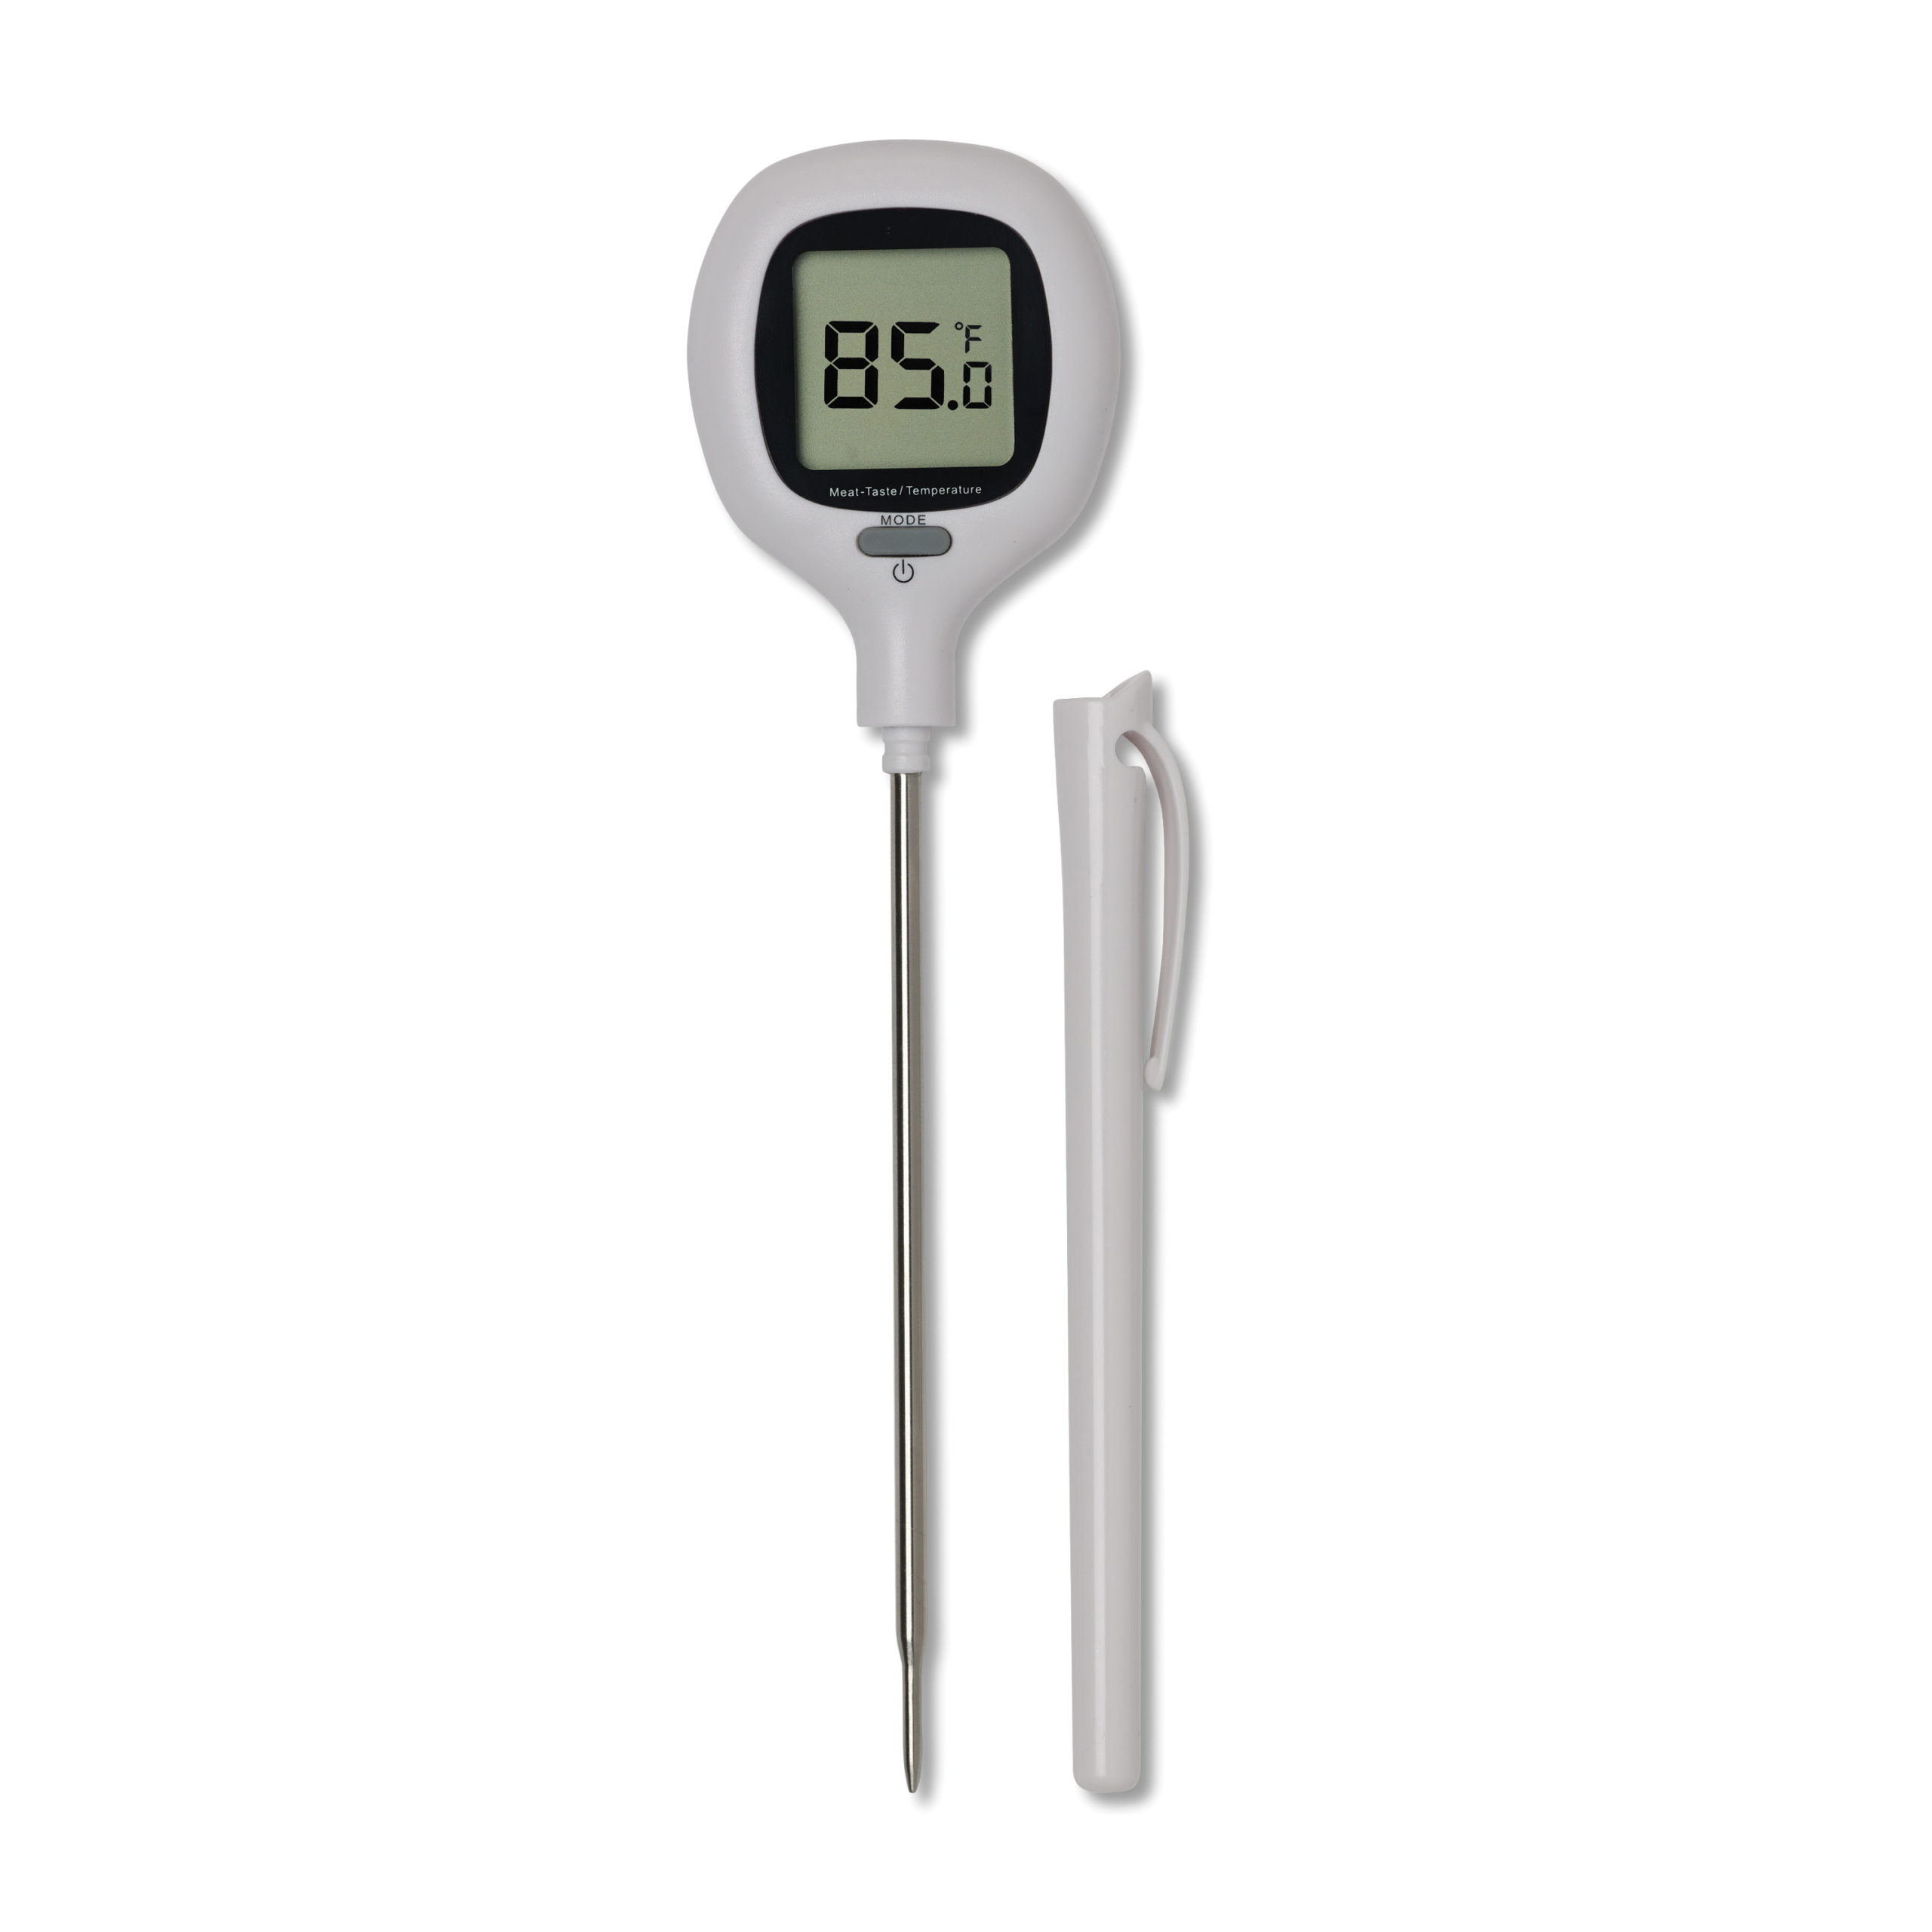 https://www.maverickthermometers.com/wp-content/uploads/2021/05/DT-15_1_product-scaled.jpg